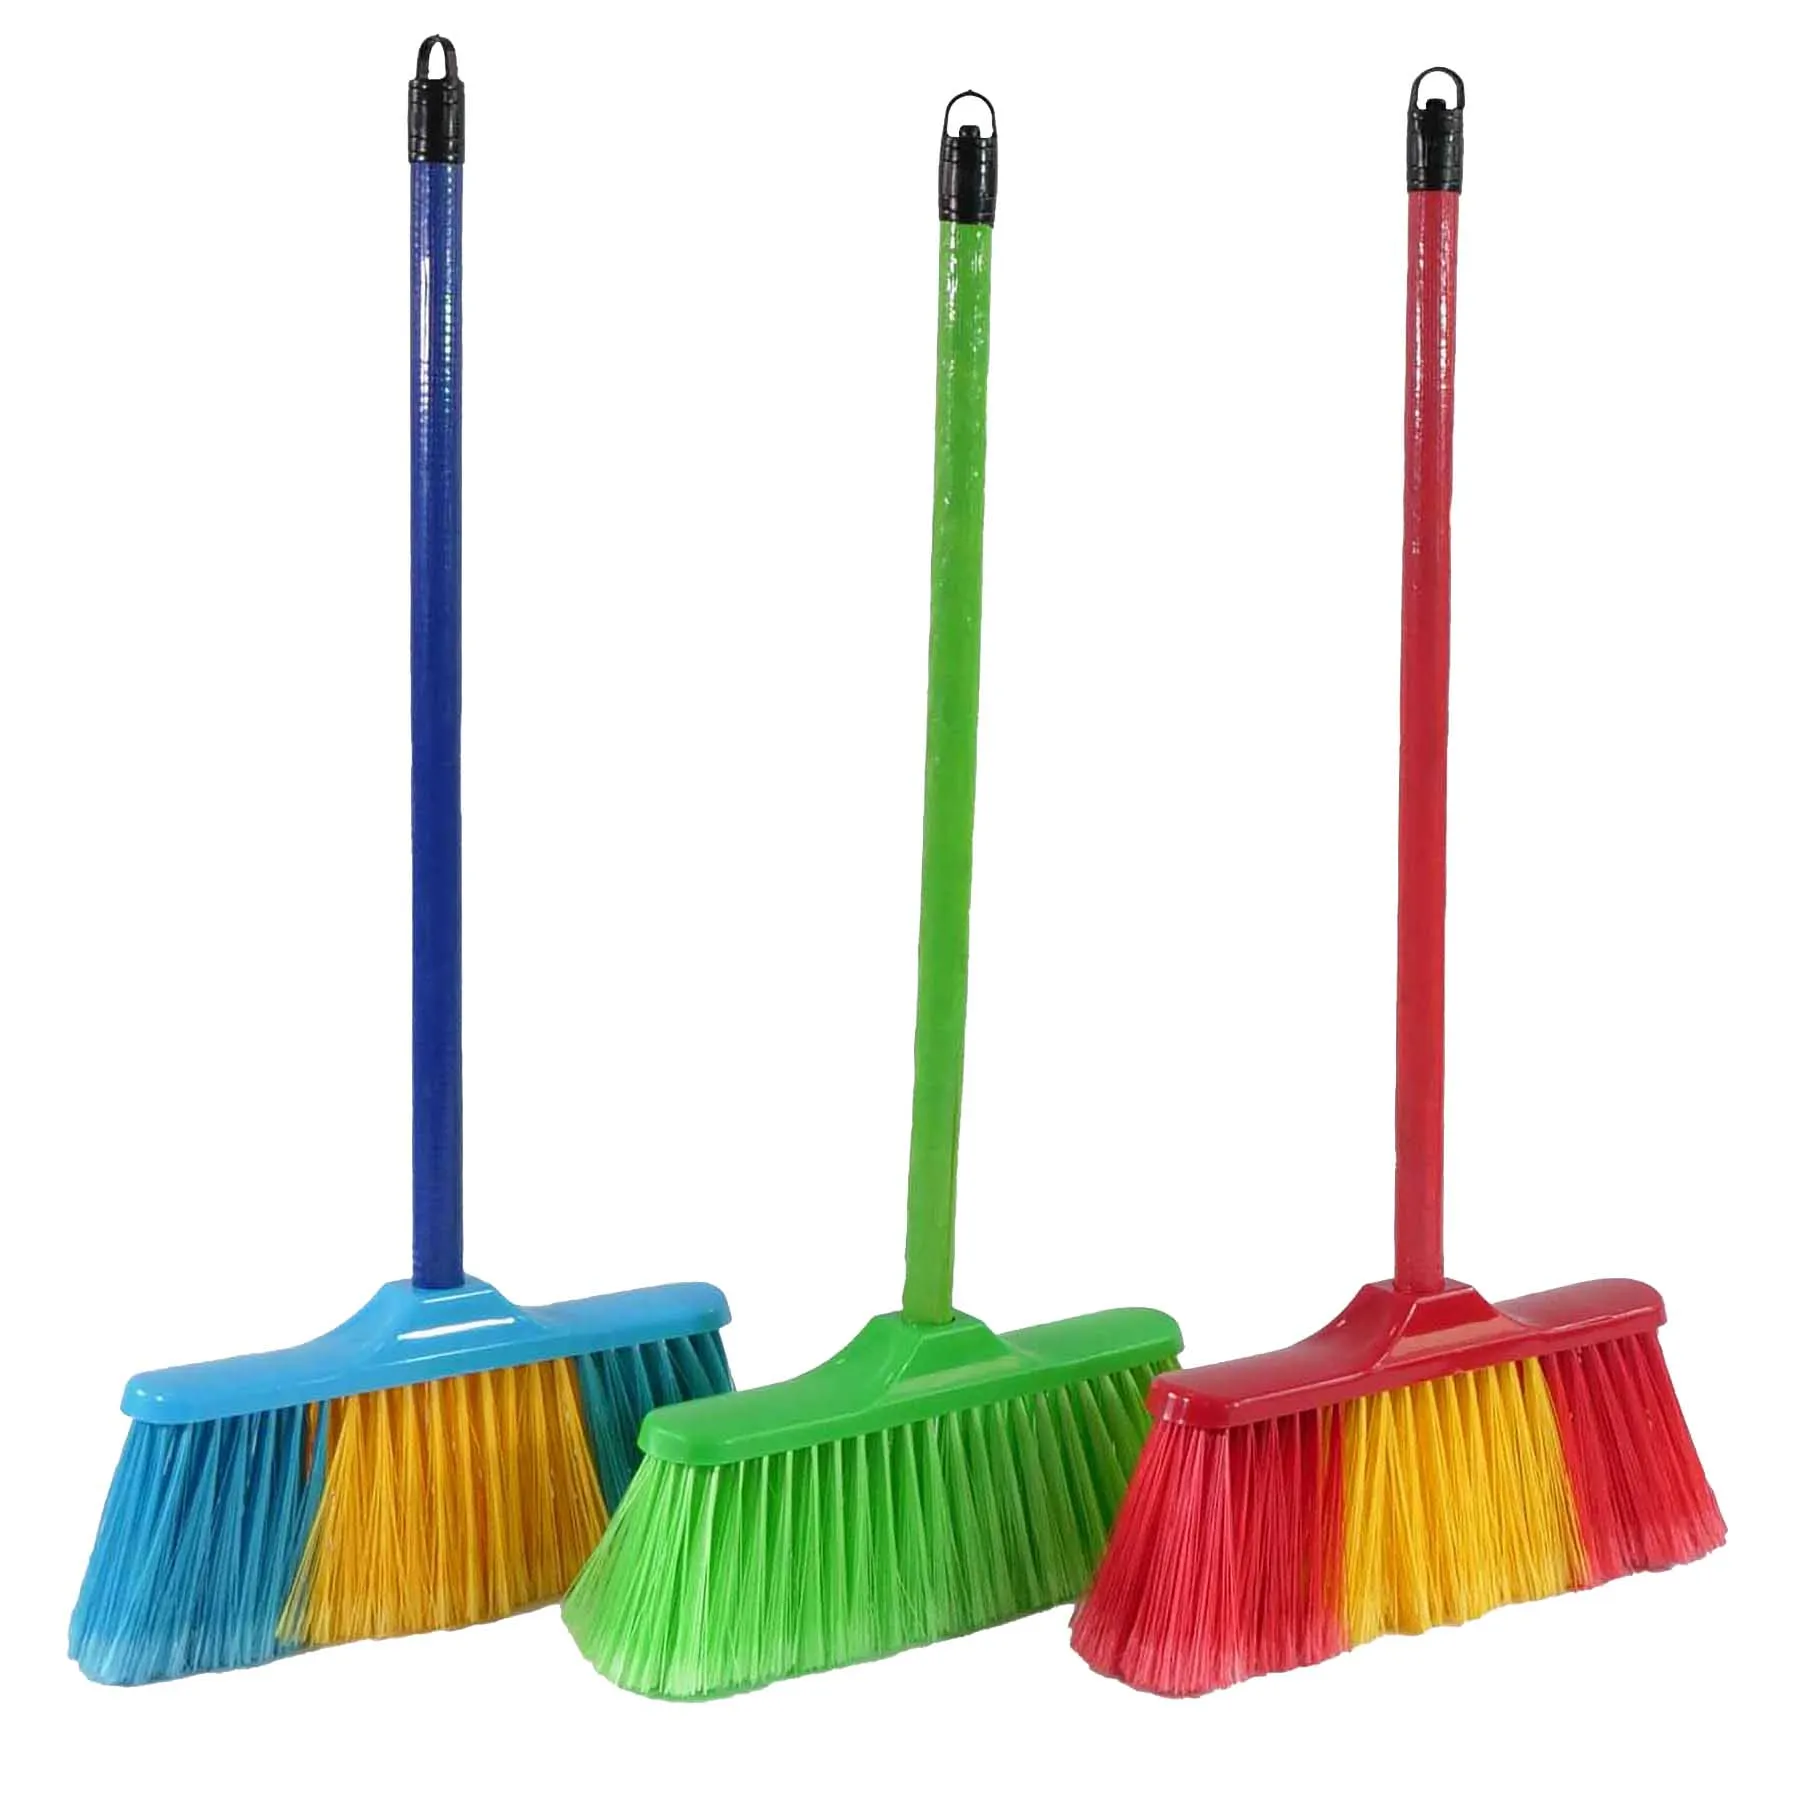 China Supplier Factory soft brooms best price plastic Household broom